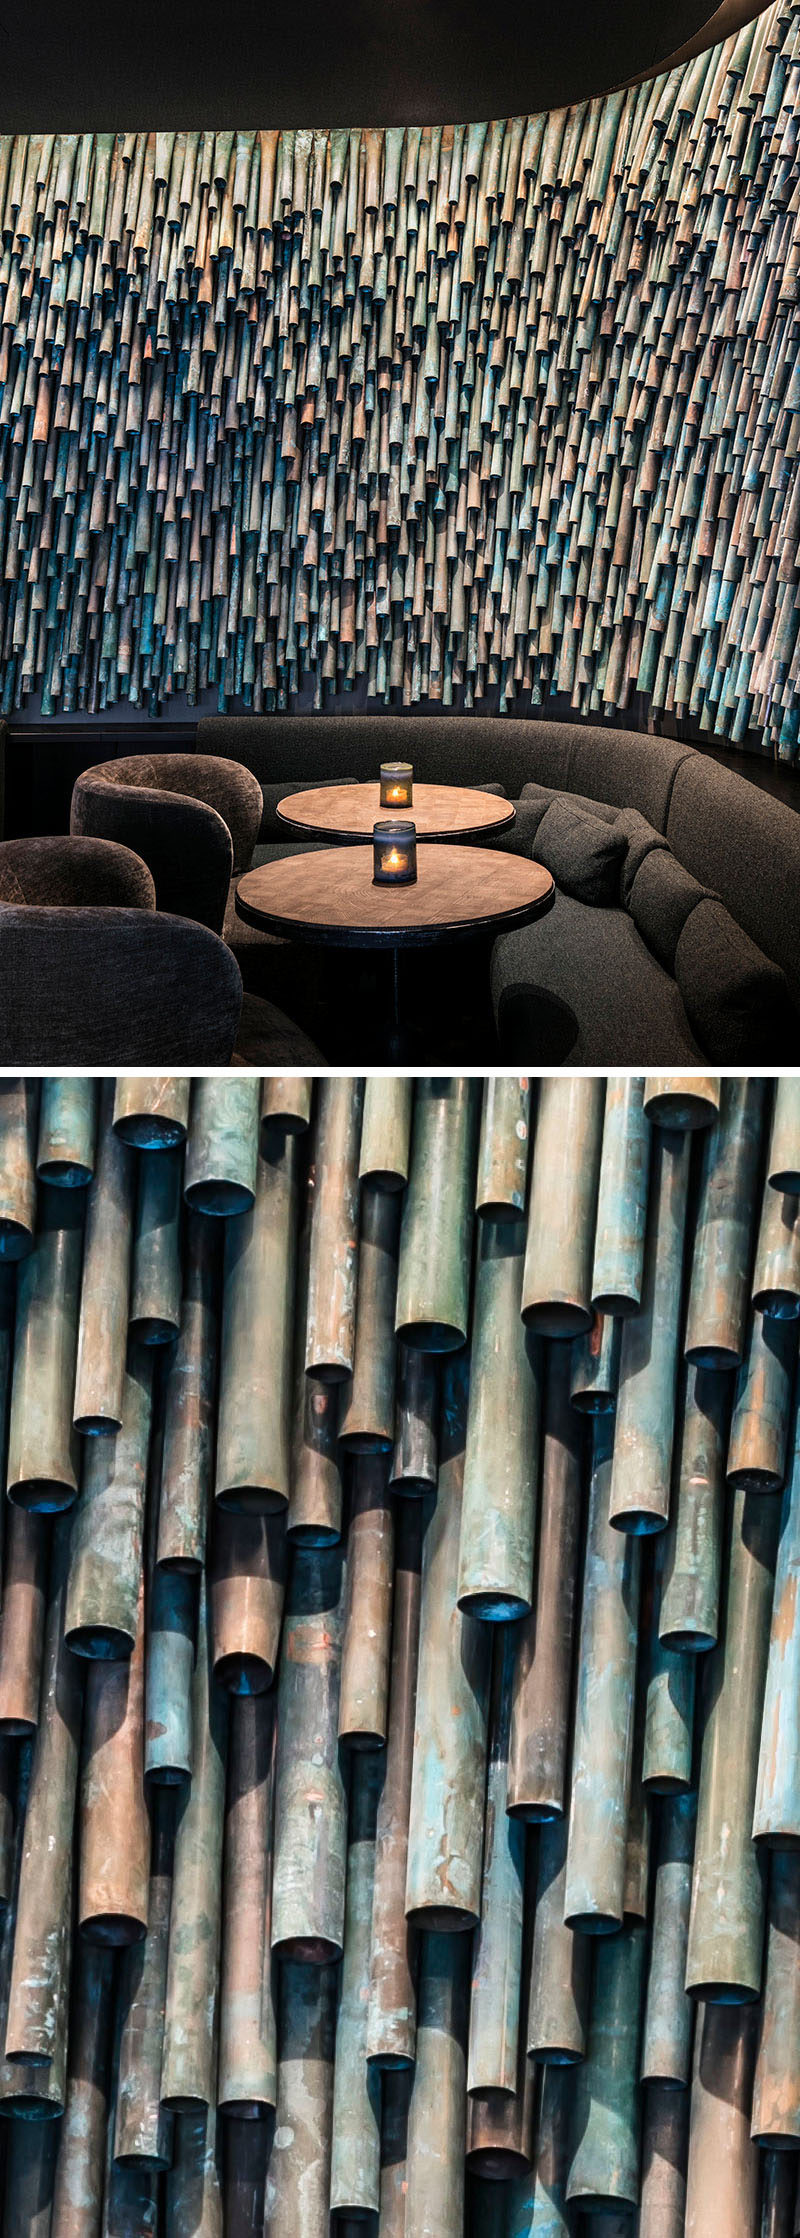 Designer Raphael Navot has used oxidised copper tubes to create a unique and interesting accent wall in a restaurant within a hotel. #AccentWall #Copper #Design